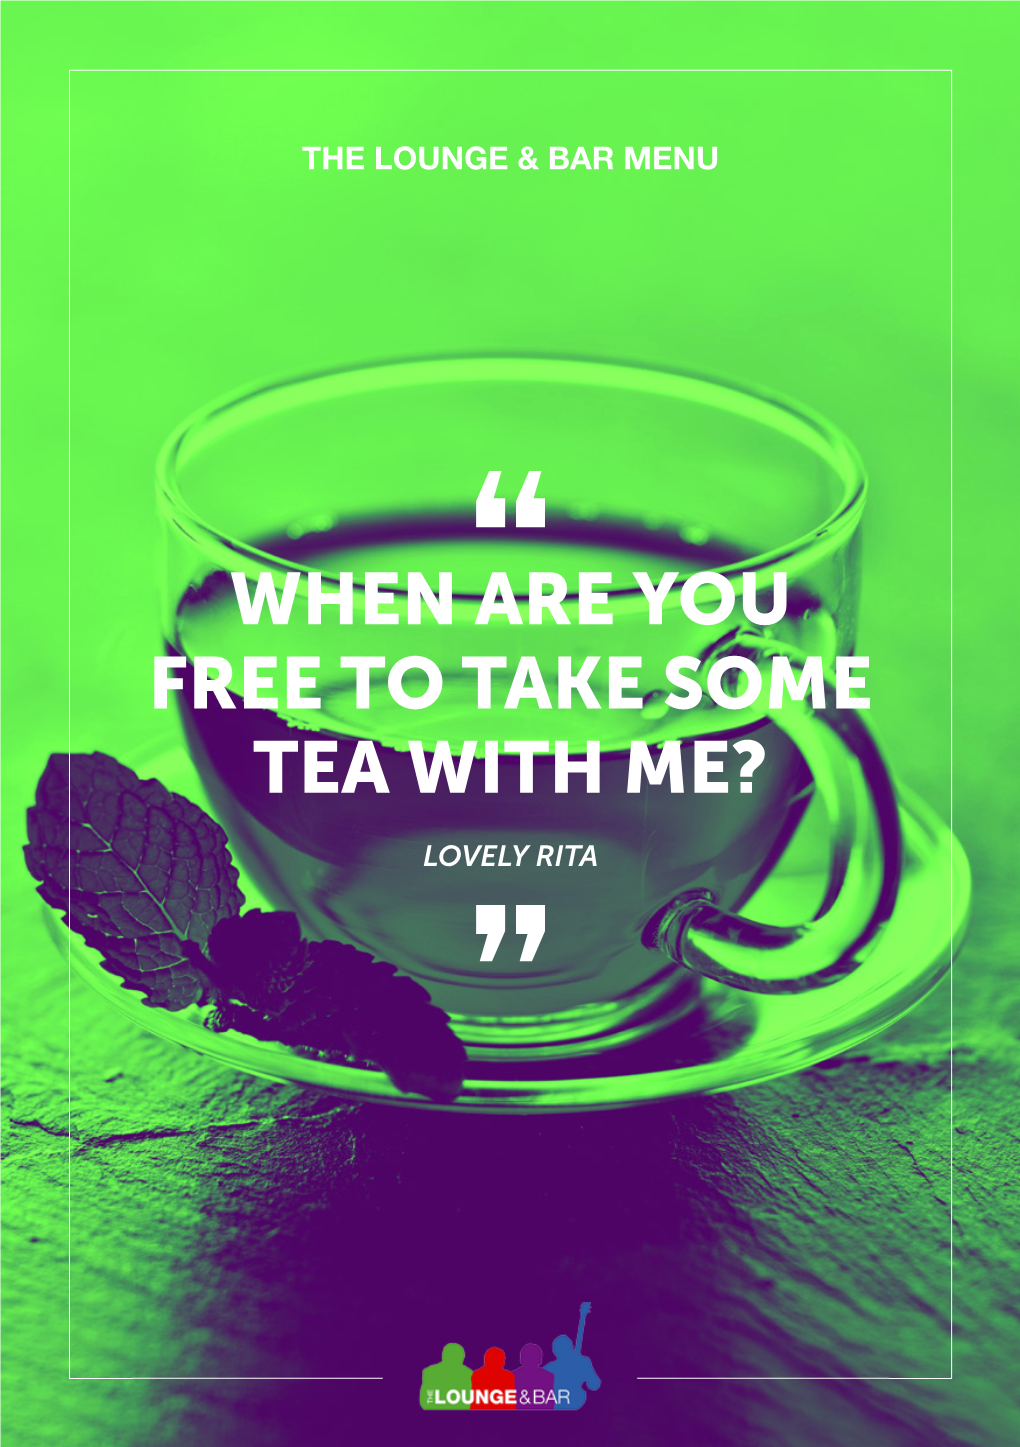 When Are You Free to Take Some Tea with Me?